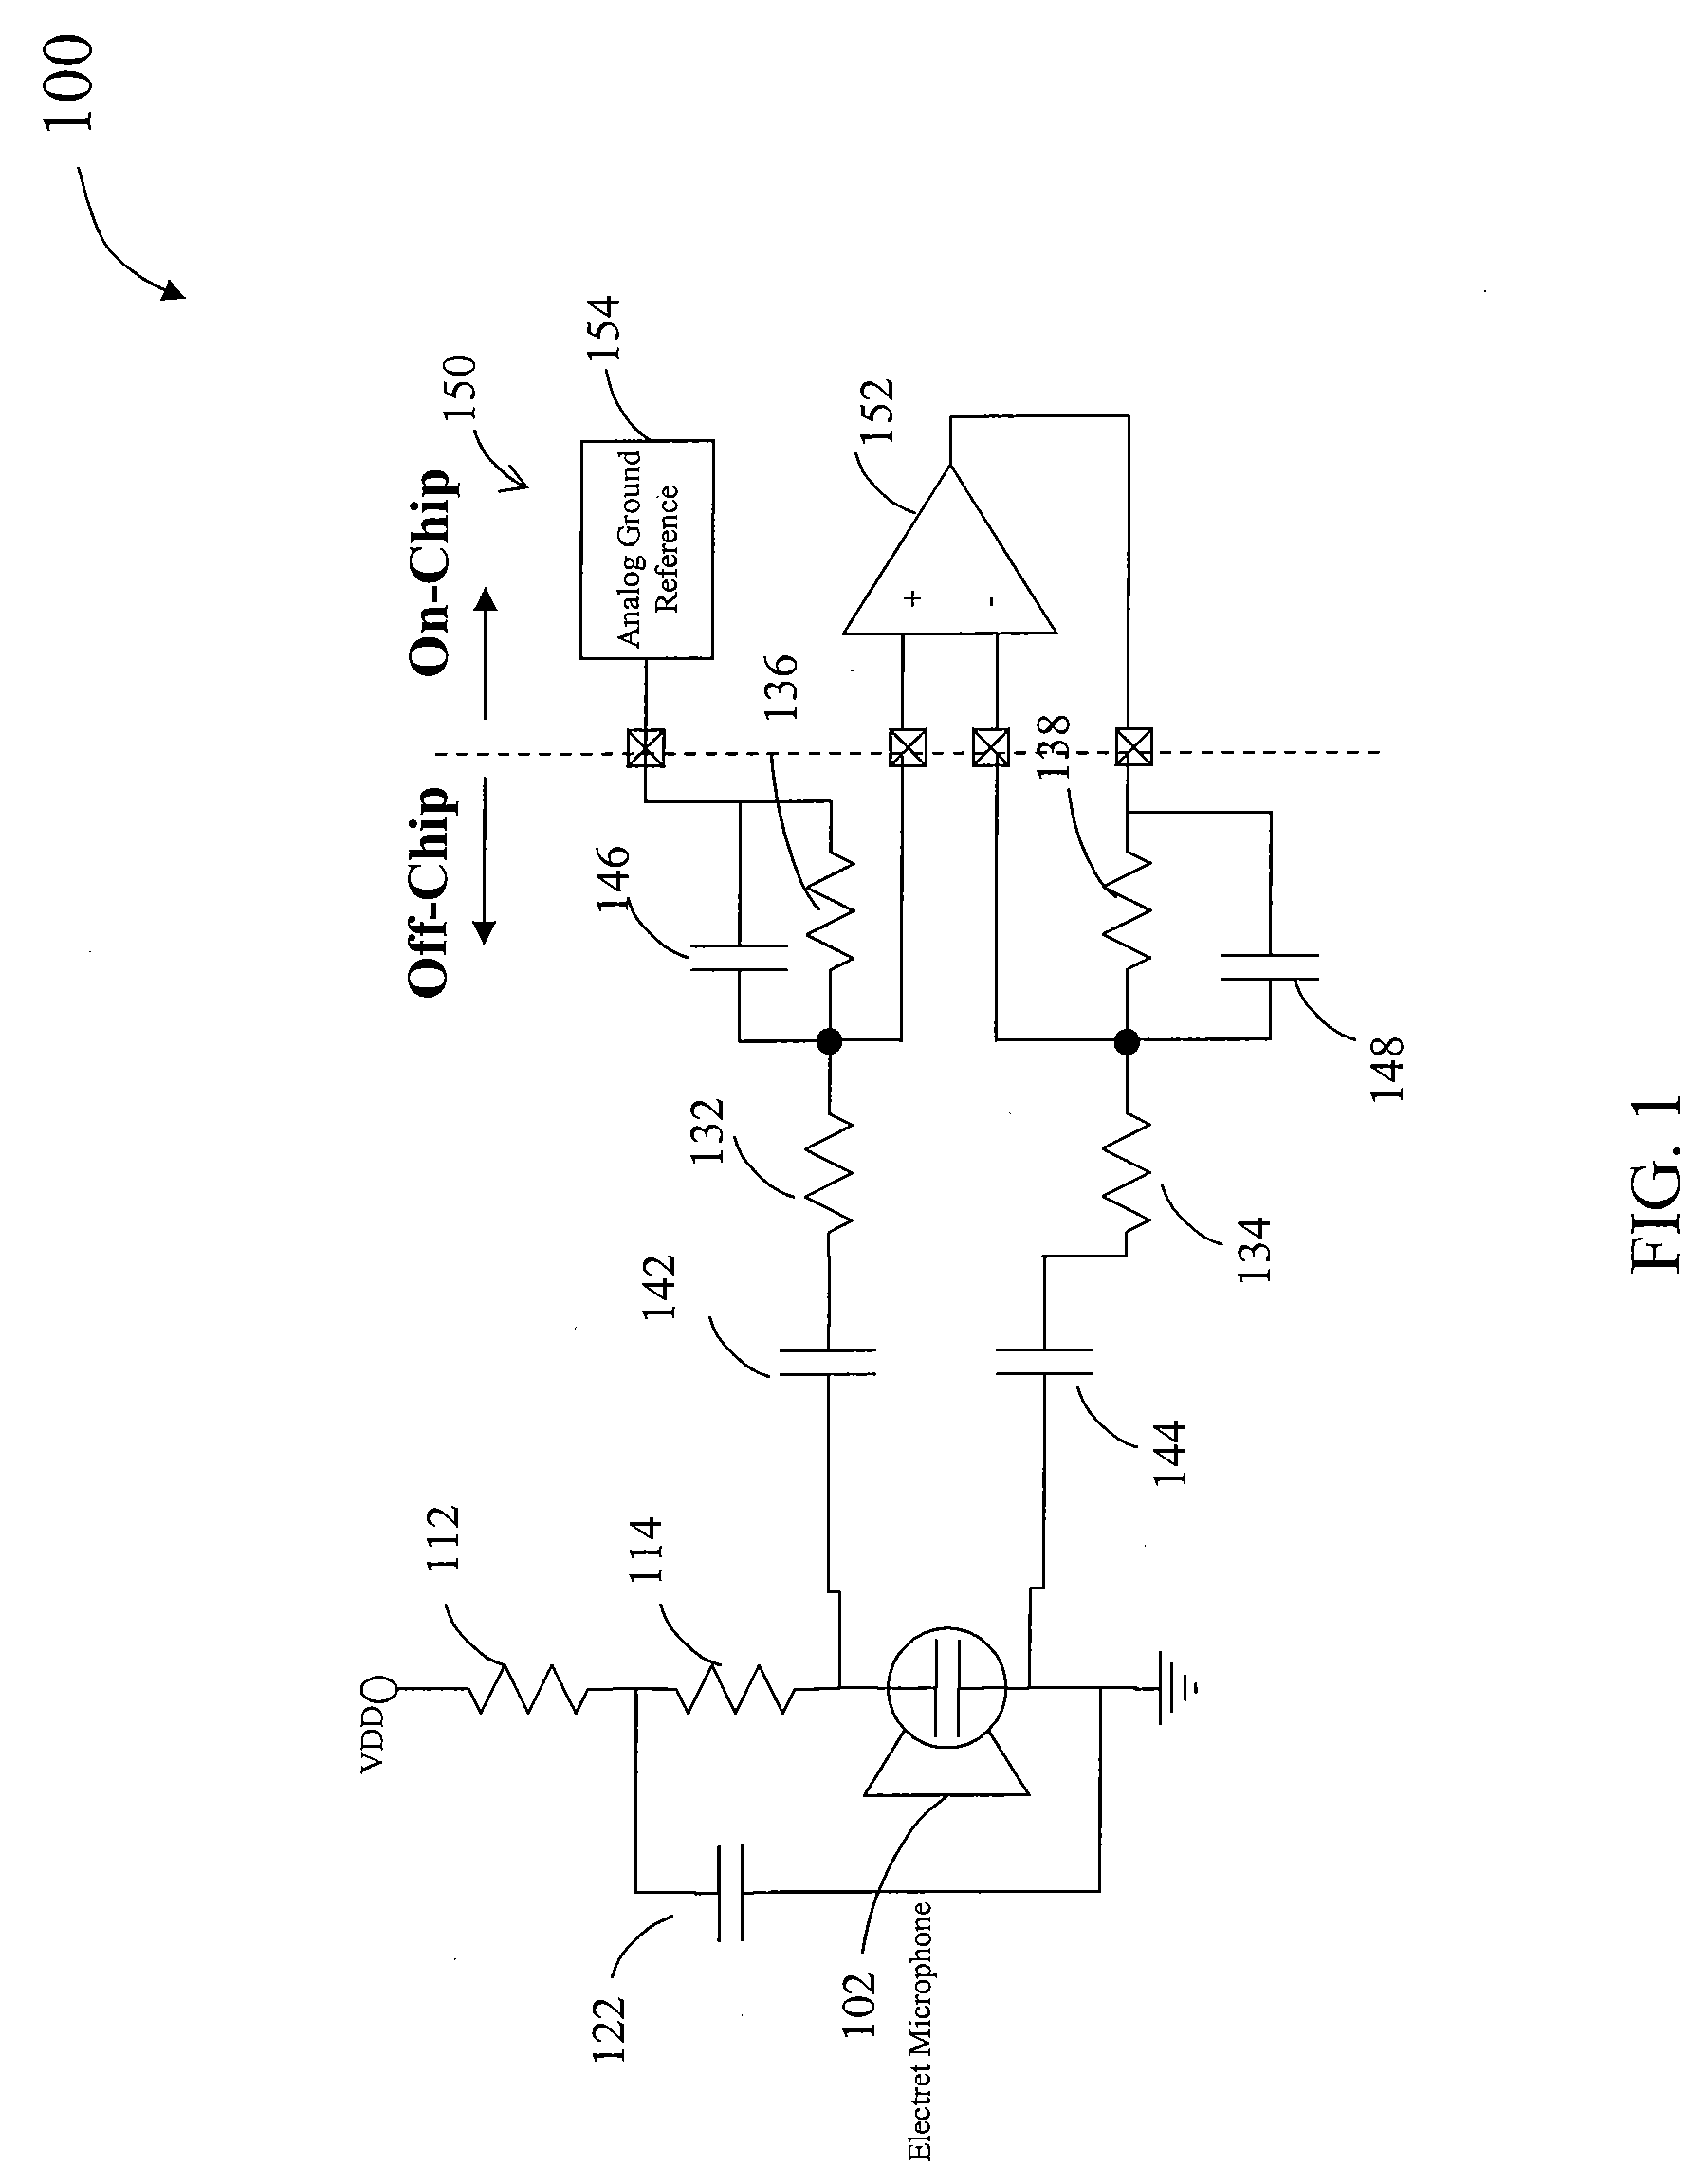 Programmable integrated microphone interface circuit